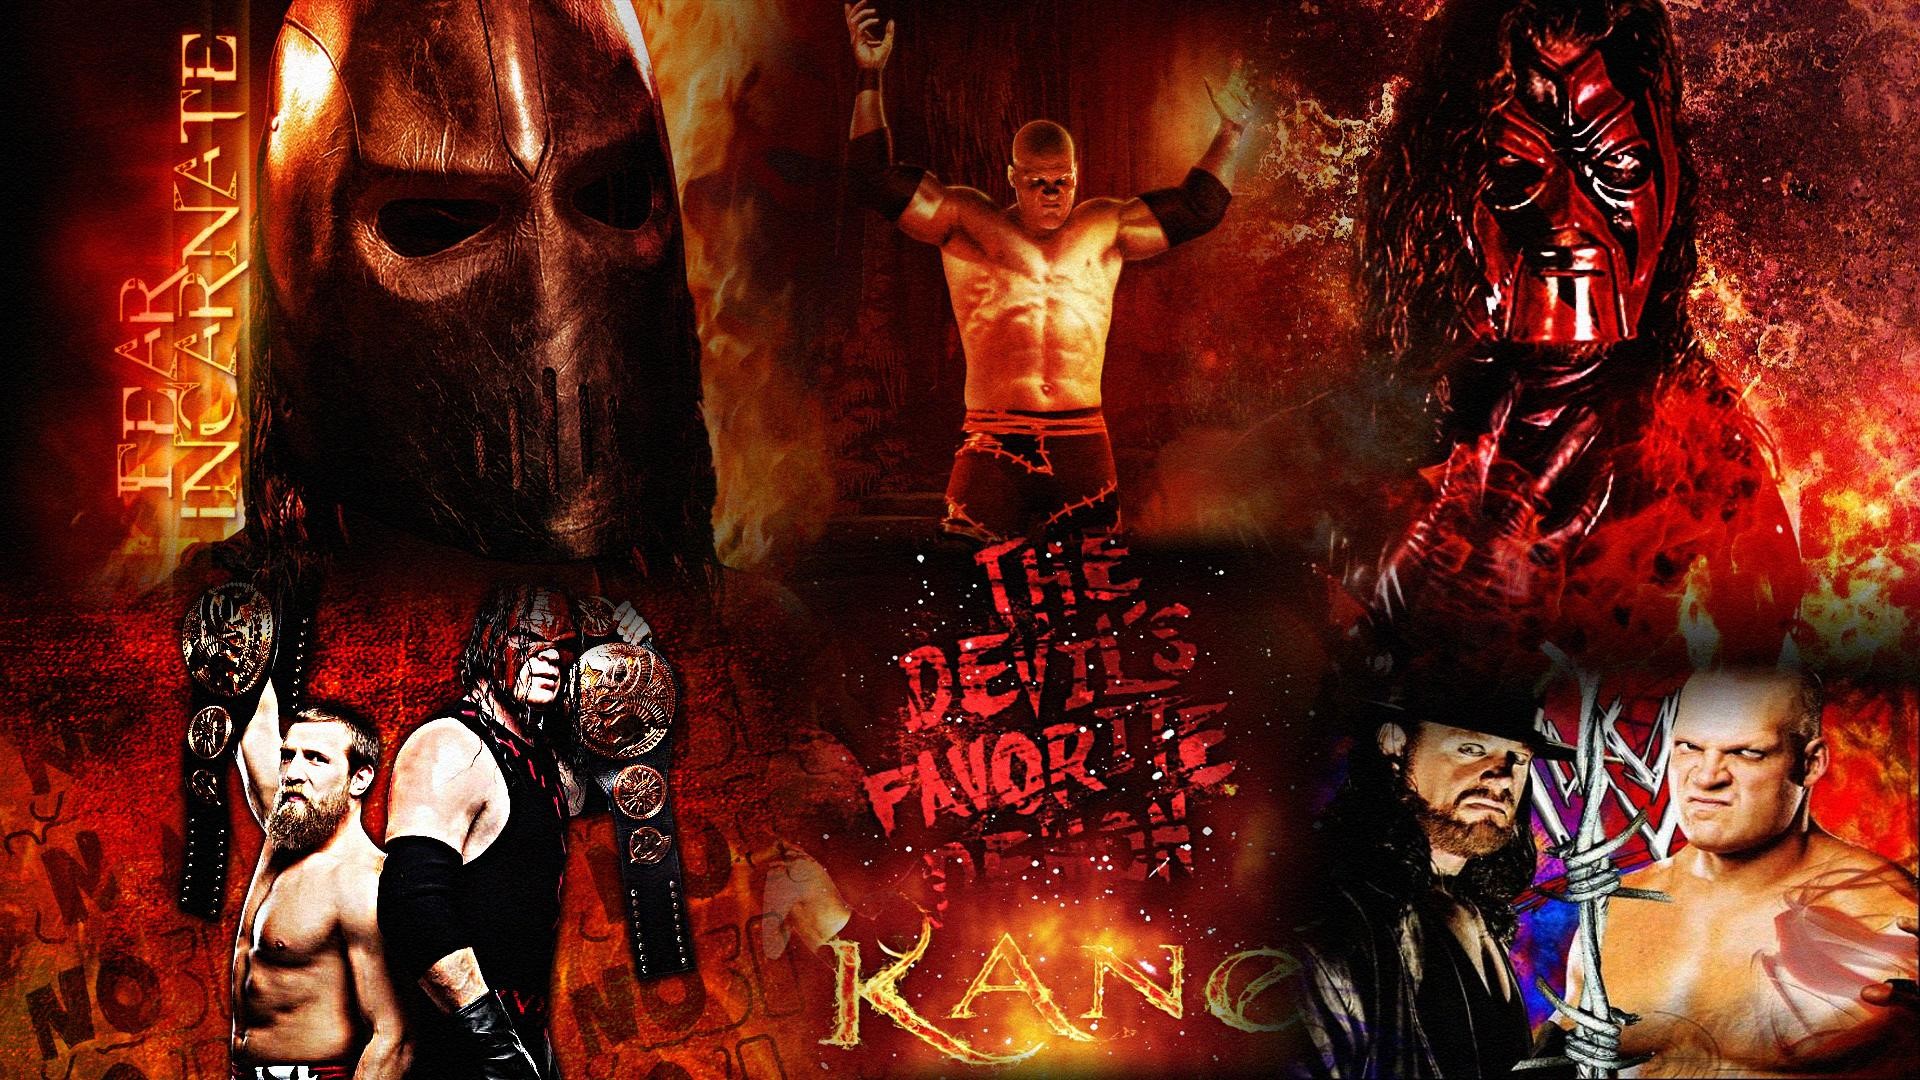 Wwe Kane 2018 Wallpaper The Best 55 Images In 2018 , HD Wallpaper & Backgrounds